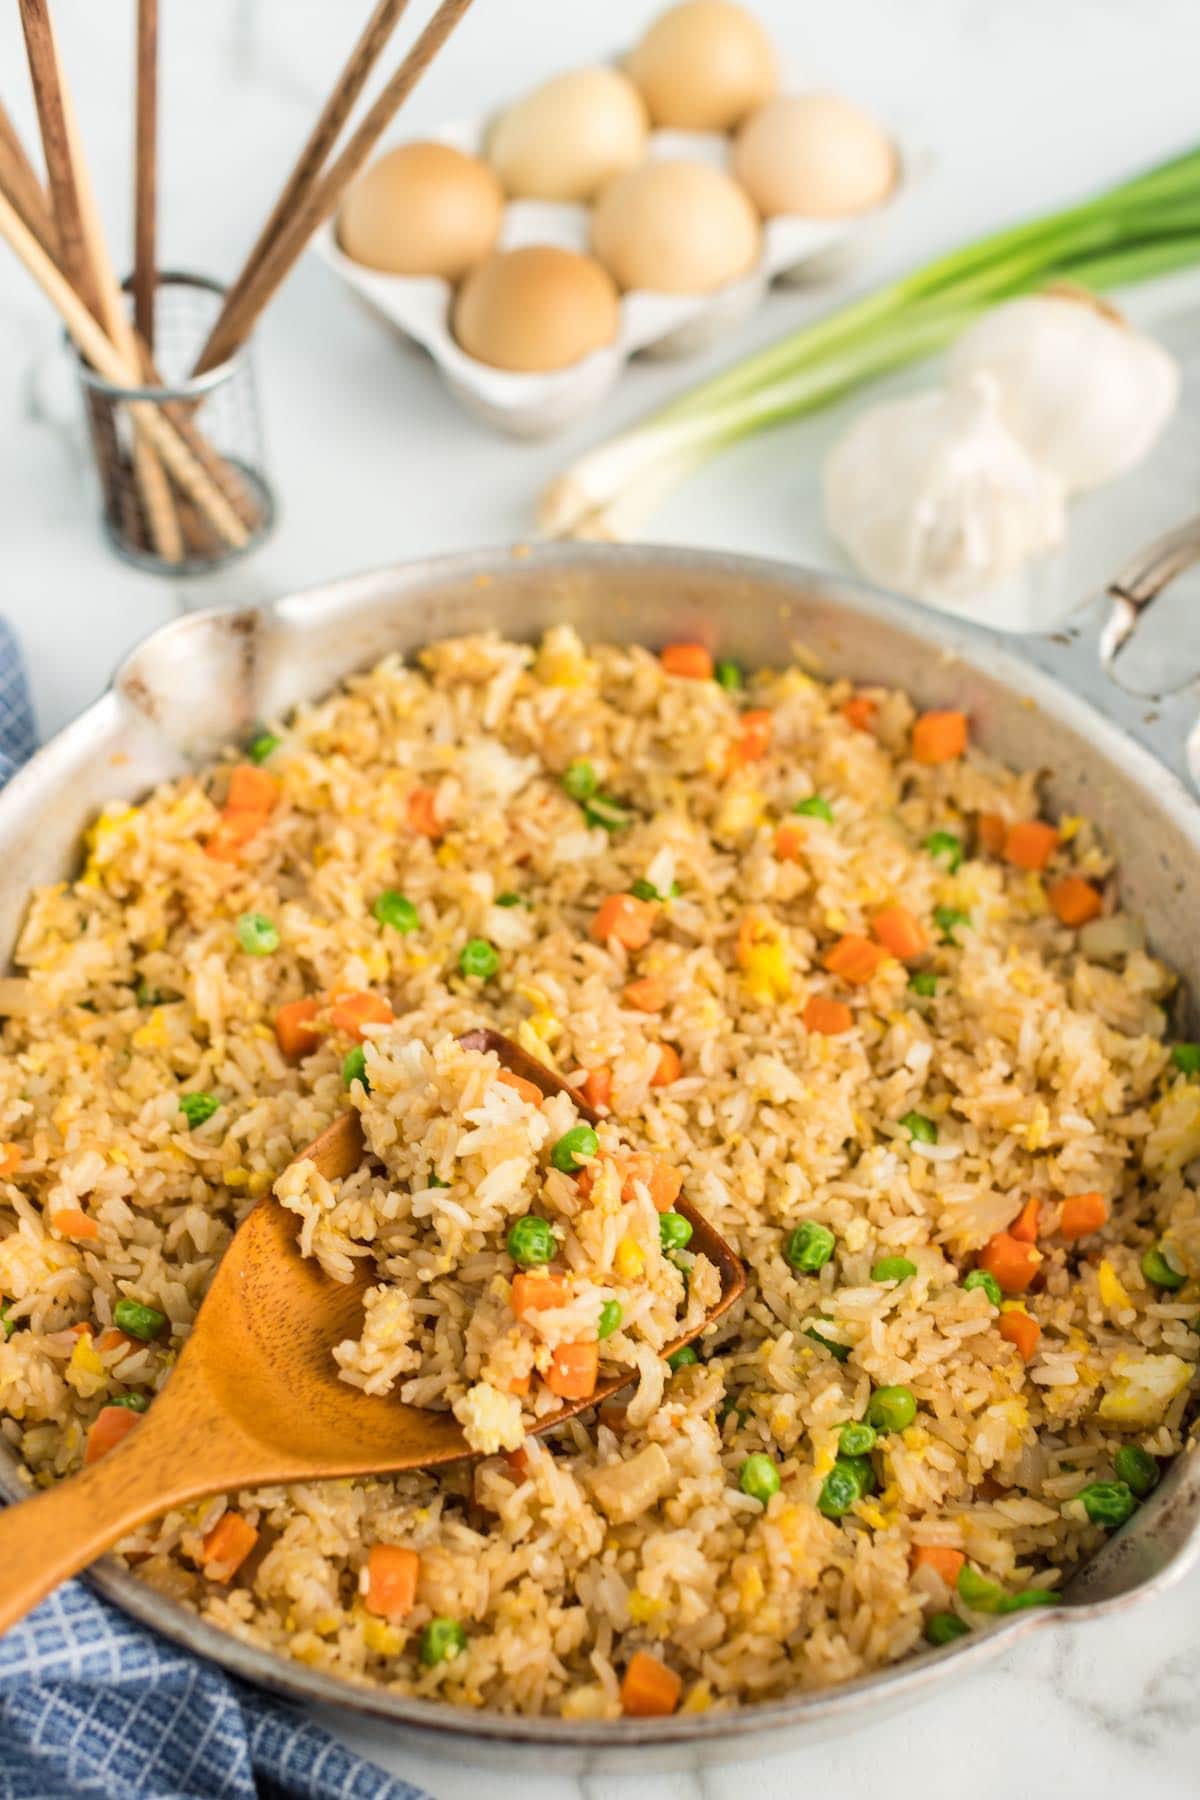 fried rice in a skilet with peas and carrots and a wooden spoon scooping some up.